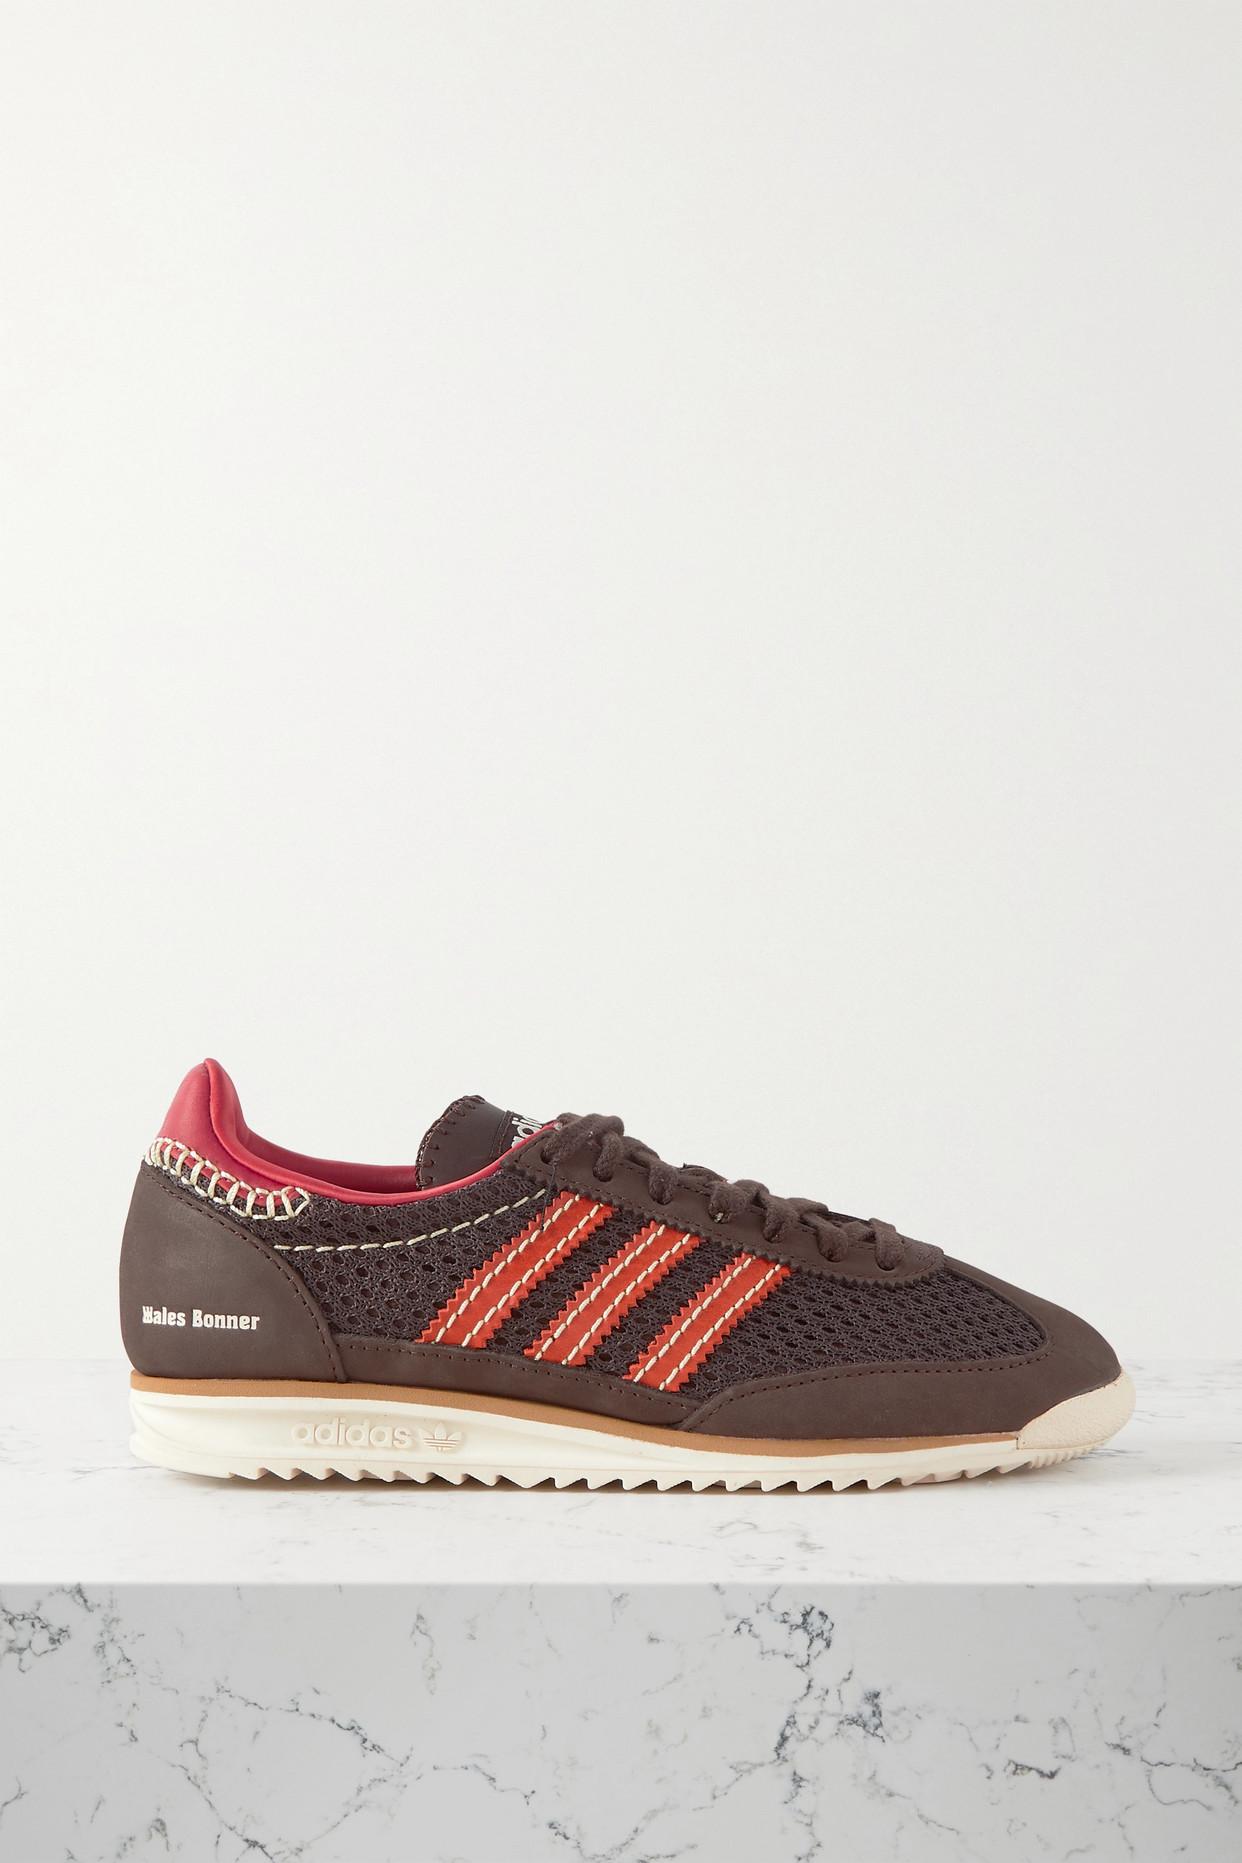 adidas Originals + Wales Bonner Sl72 Leather-trimmed Suede And Mesh Sneakers  in Brown | Lyst